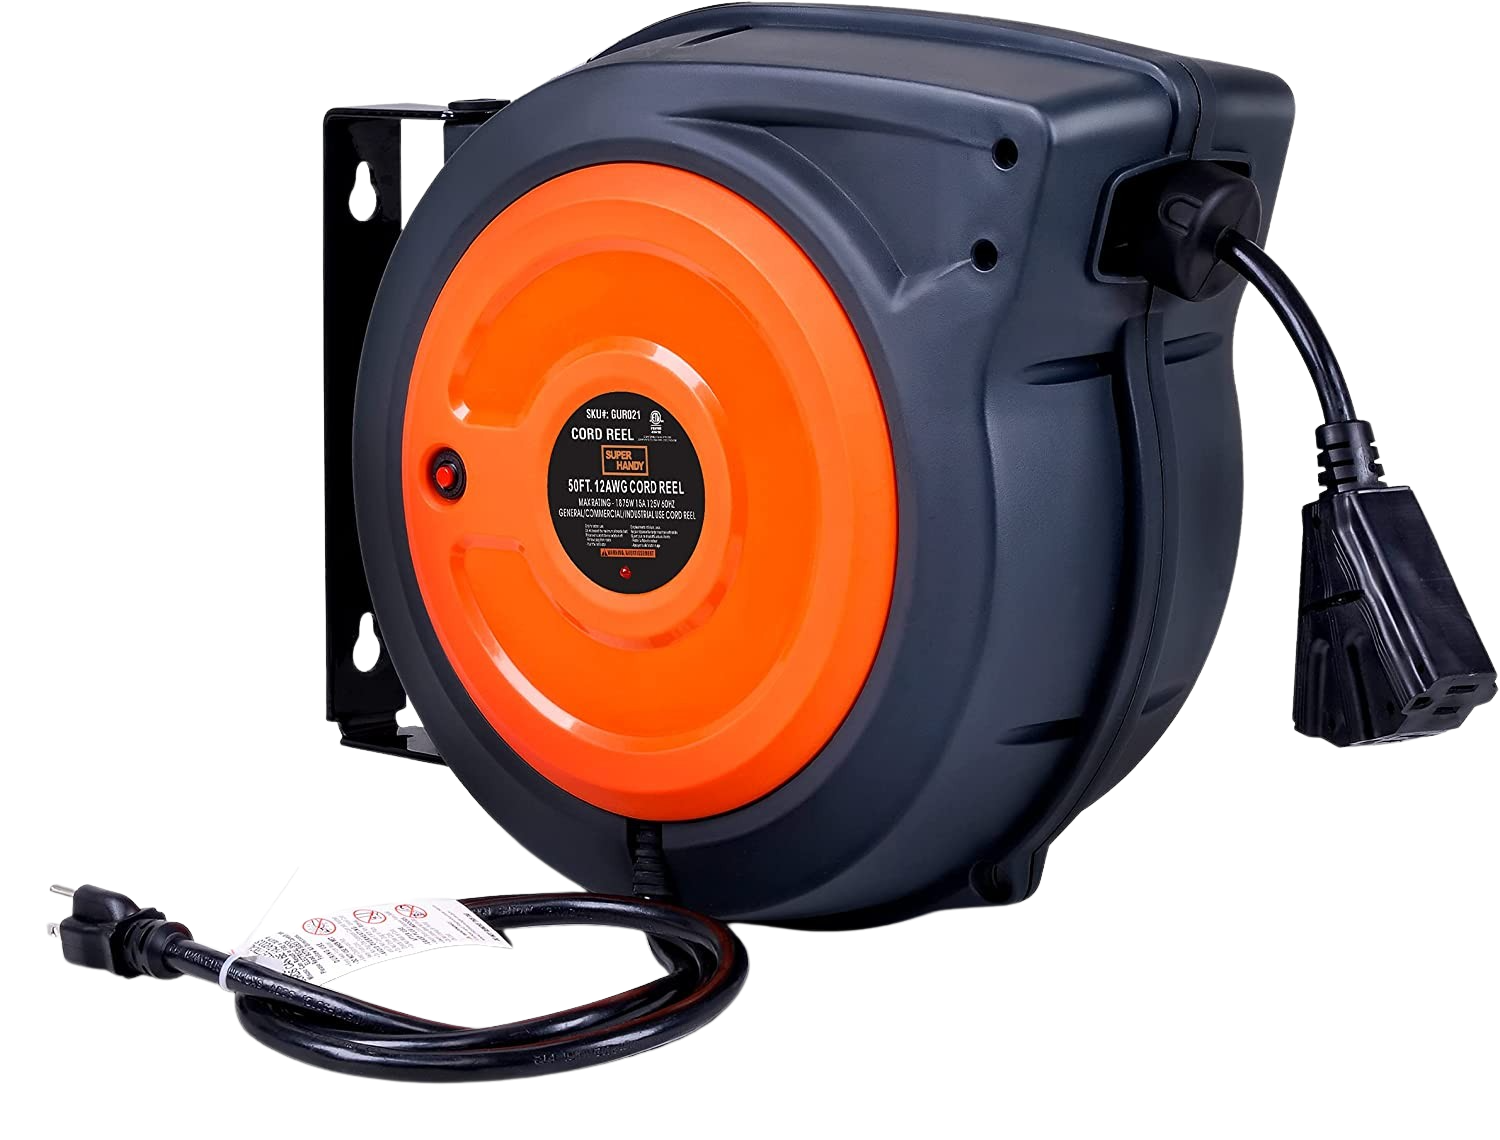 Super Handy GUR030 12AWG x 65' 15A 3 Grounded Outlets Mountable Retractable Extension Cord Reel New